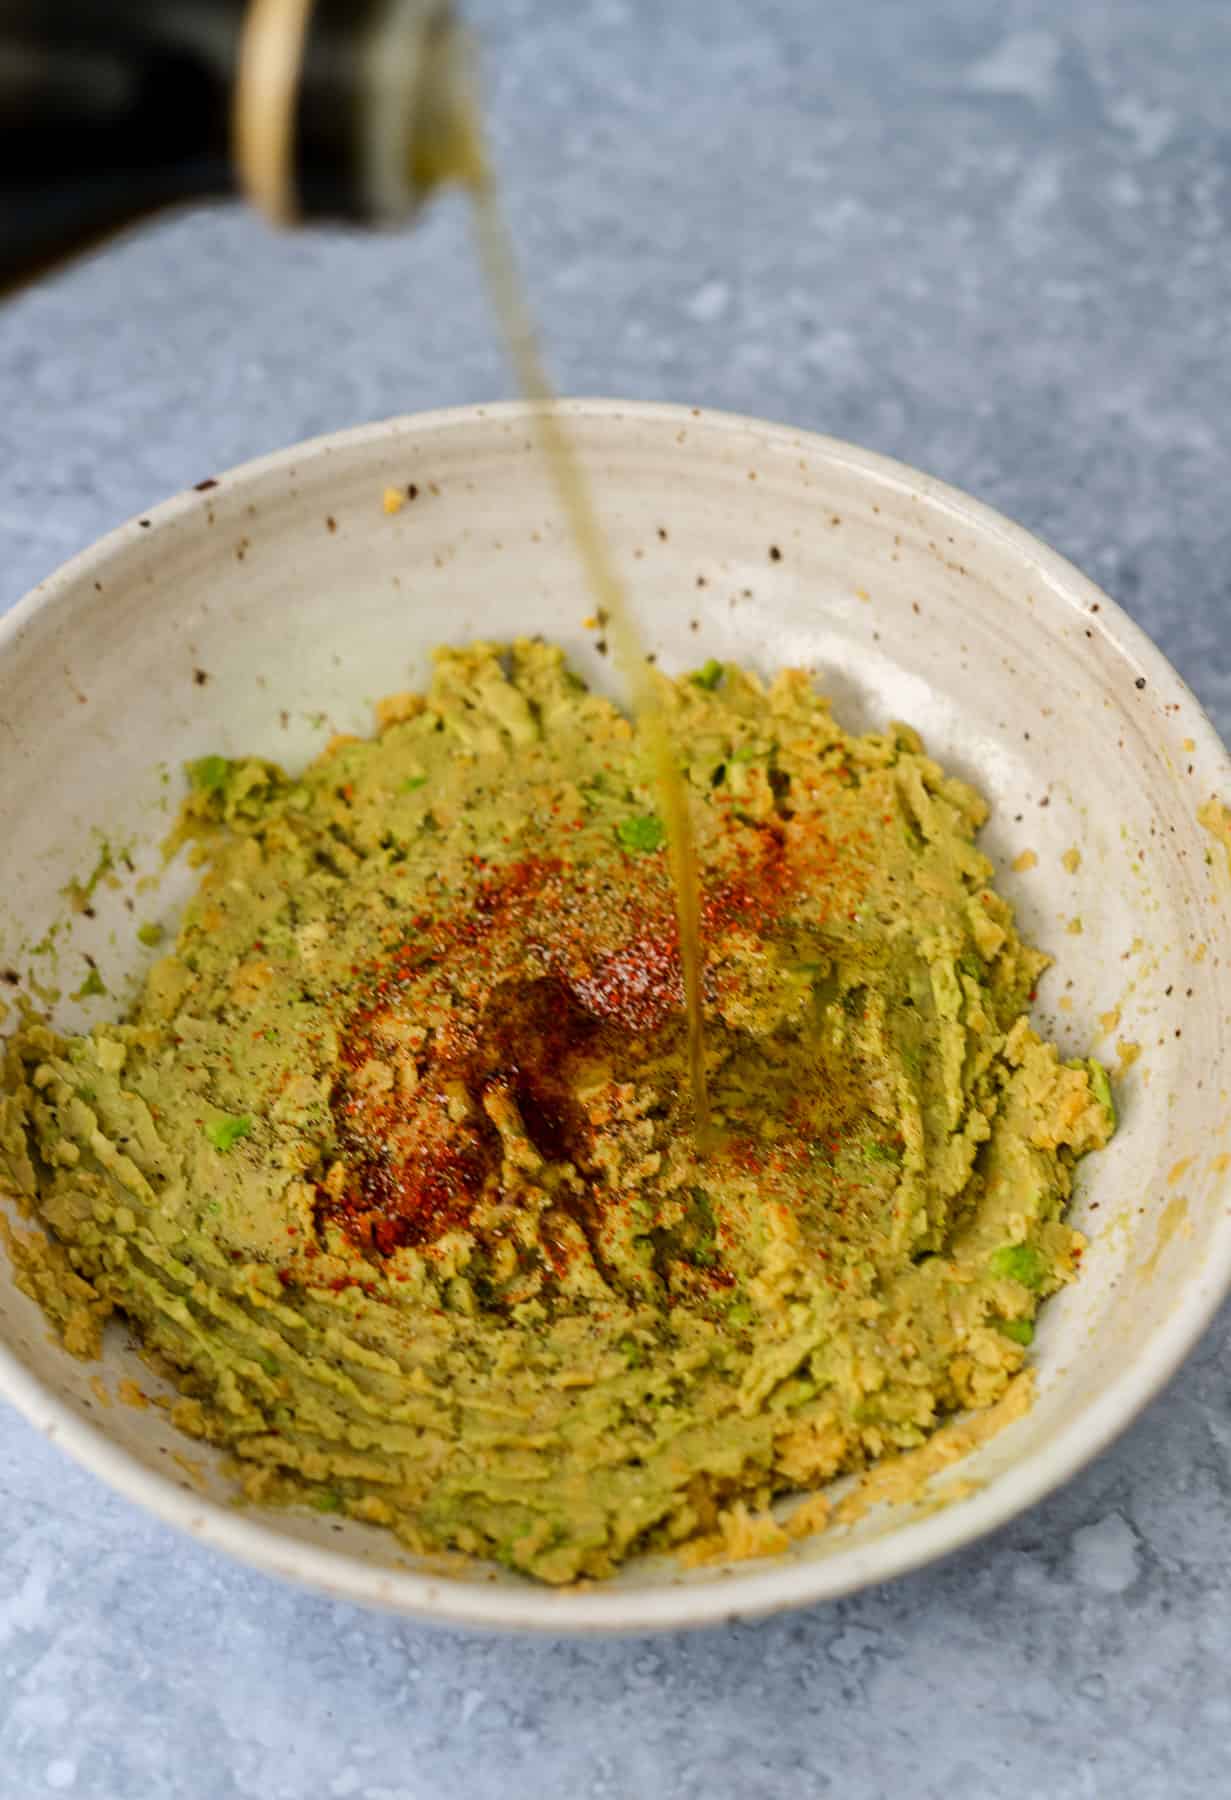 pouring olive oil into smashed chickpeas and avocado salad with spices